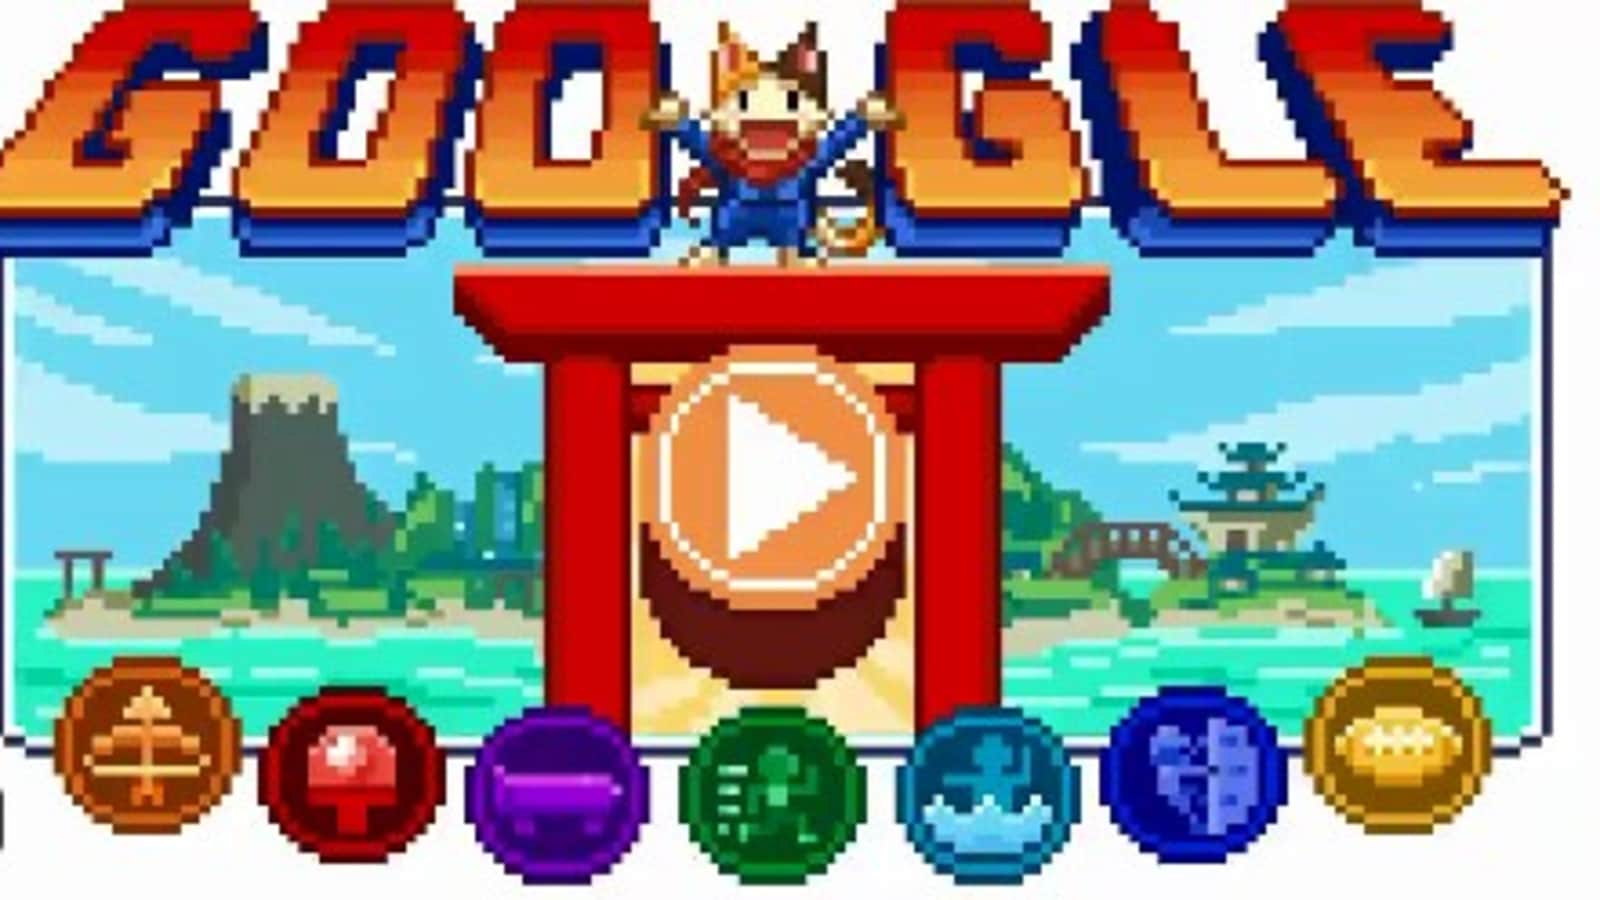 Google Doodle Olympics Google Launches Doodle Champion Island Games To